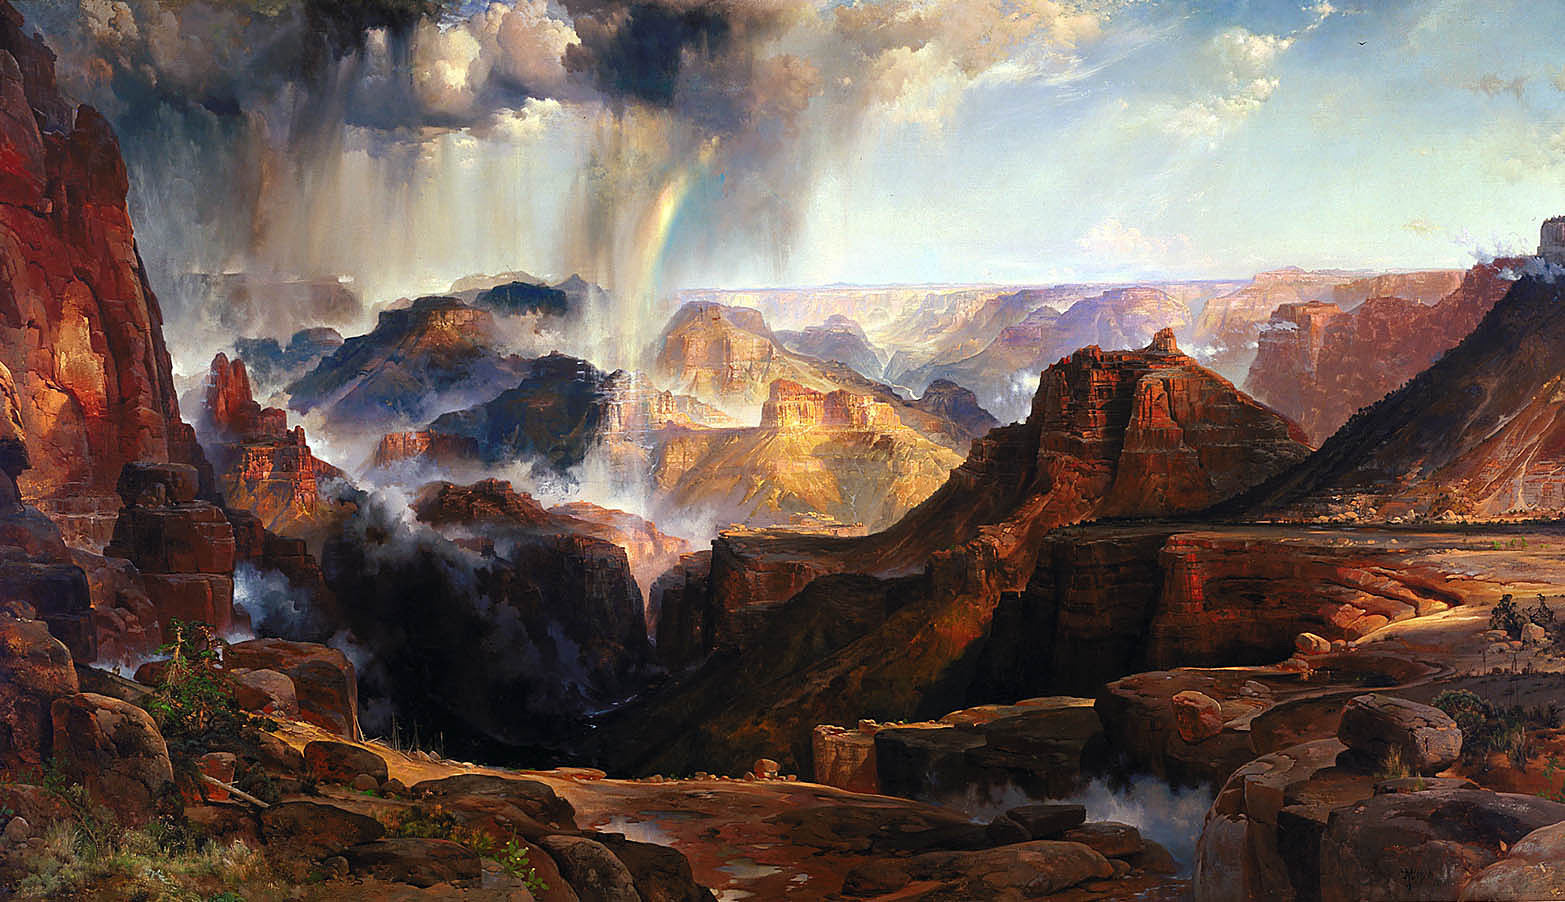 An oil painting of a landscape of massive cliffs and canyons.